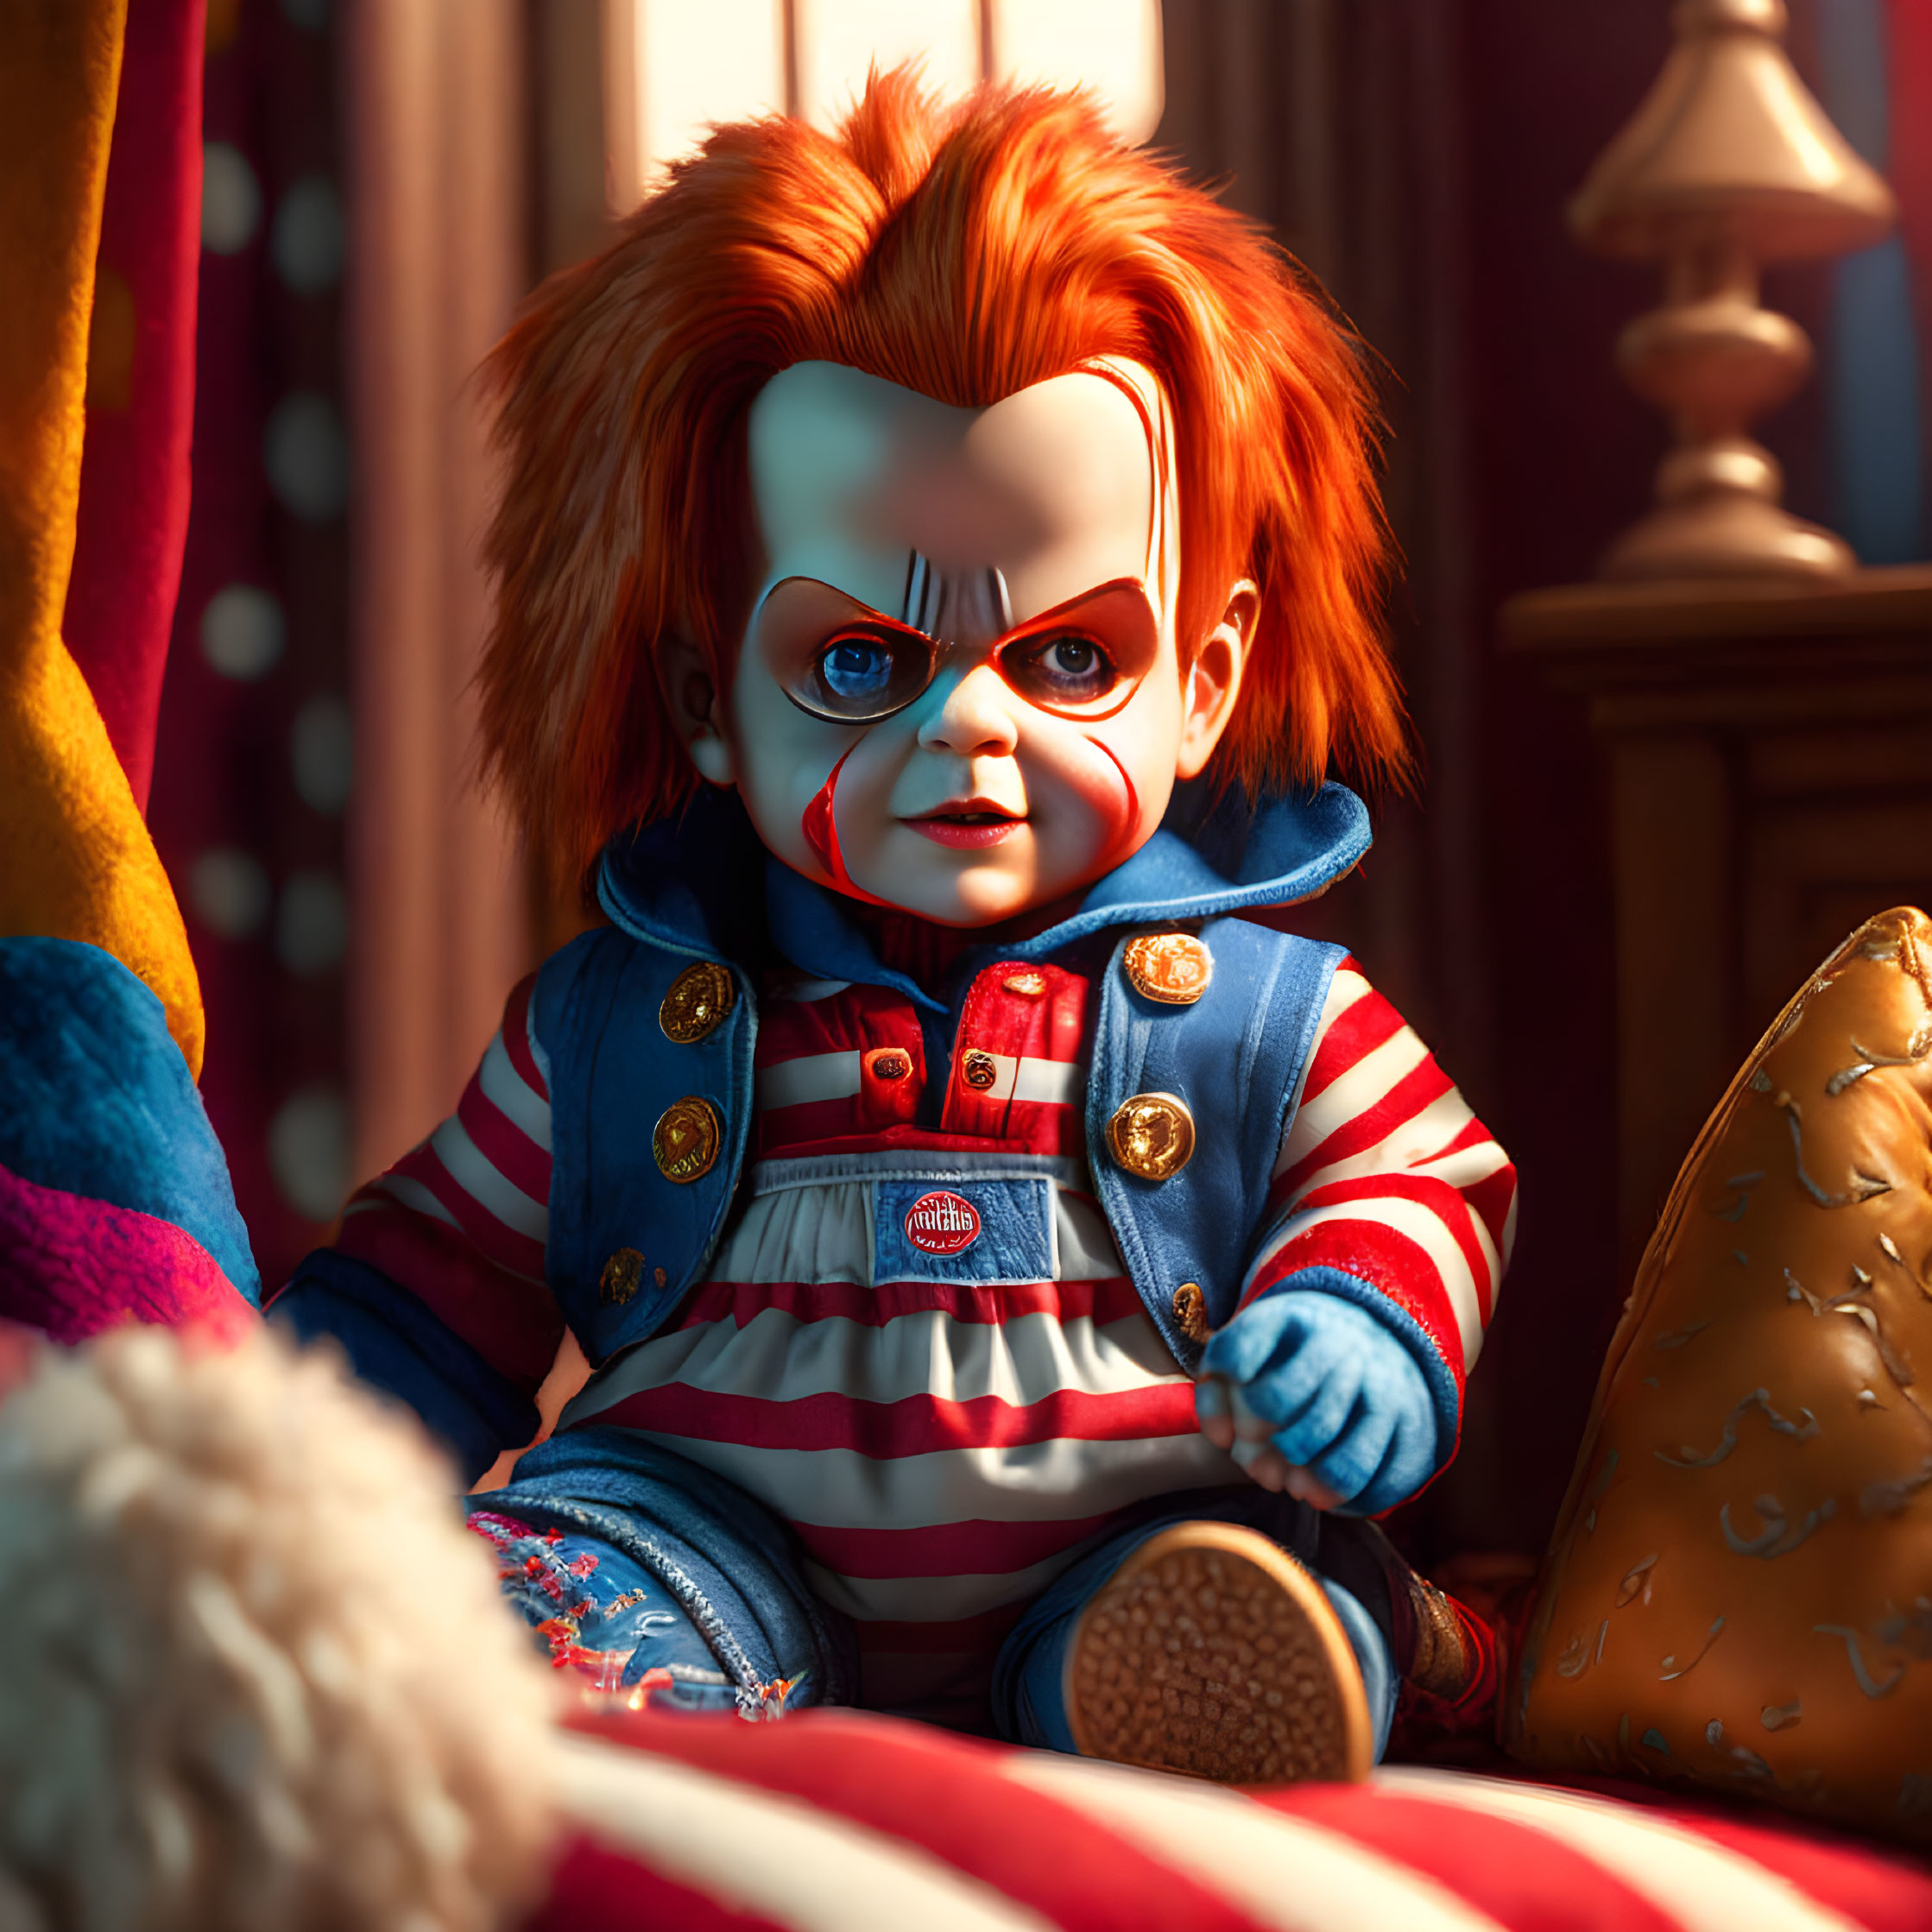 Detailed Chucky Doll Artwork on Colorful Couch